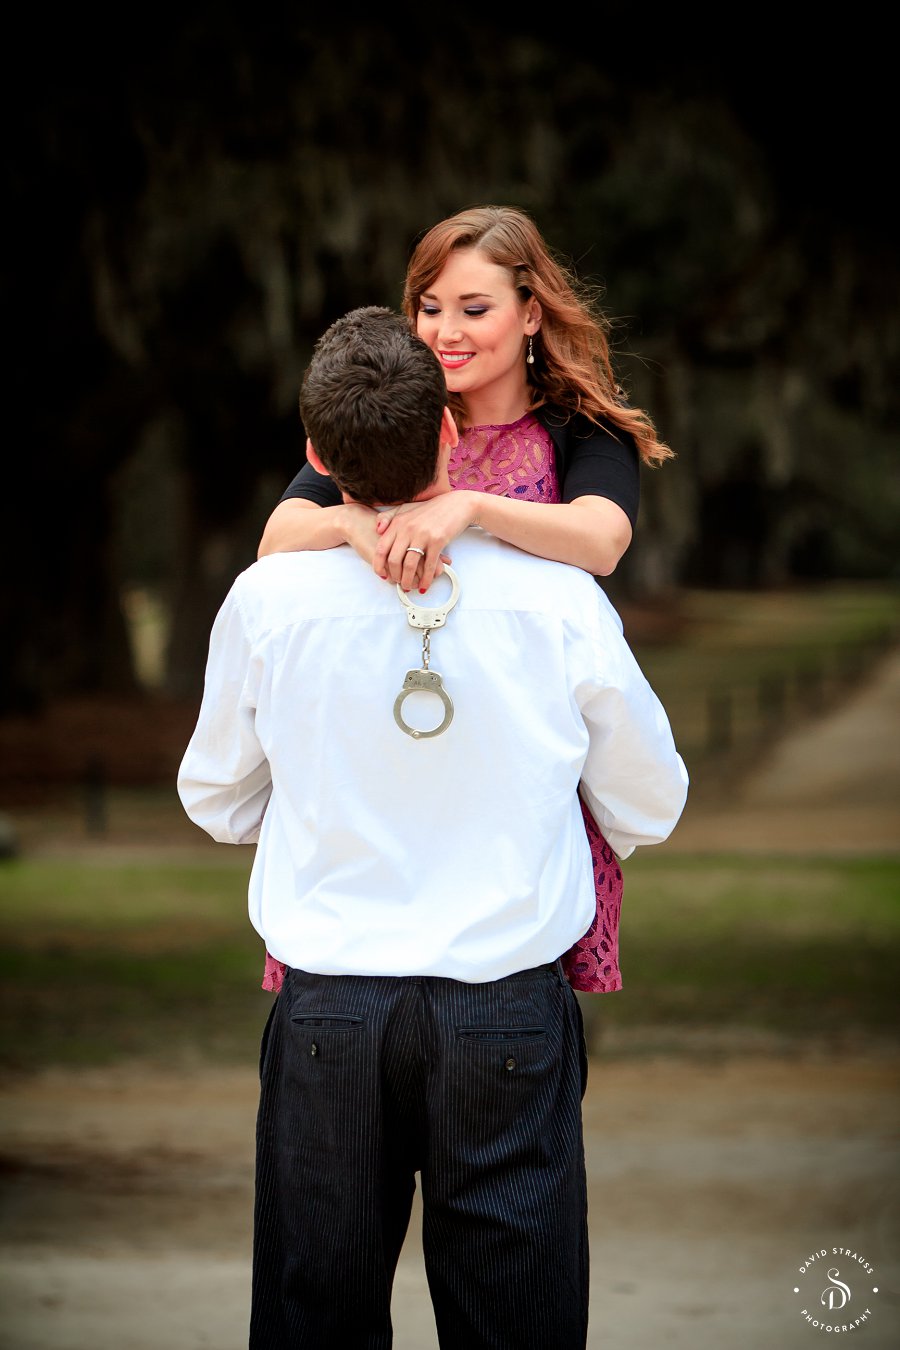 Boone Hall Engagement Pictures - Charleston Wedding Photographer David Strauss - Morgan and Andrew - 9